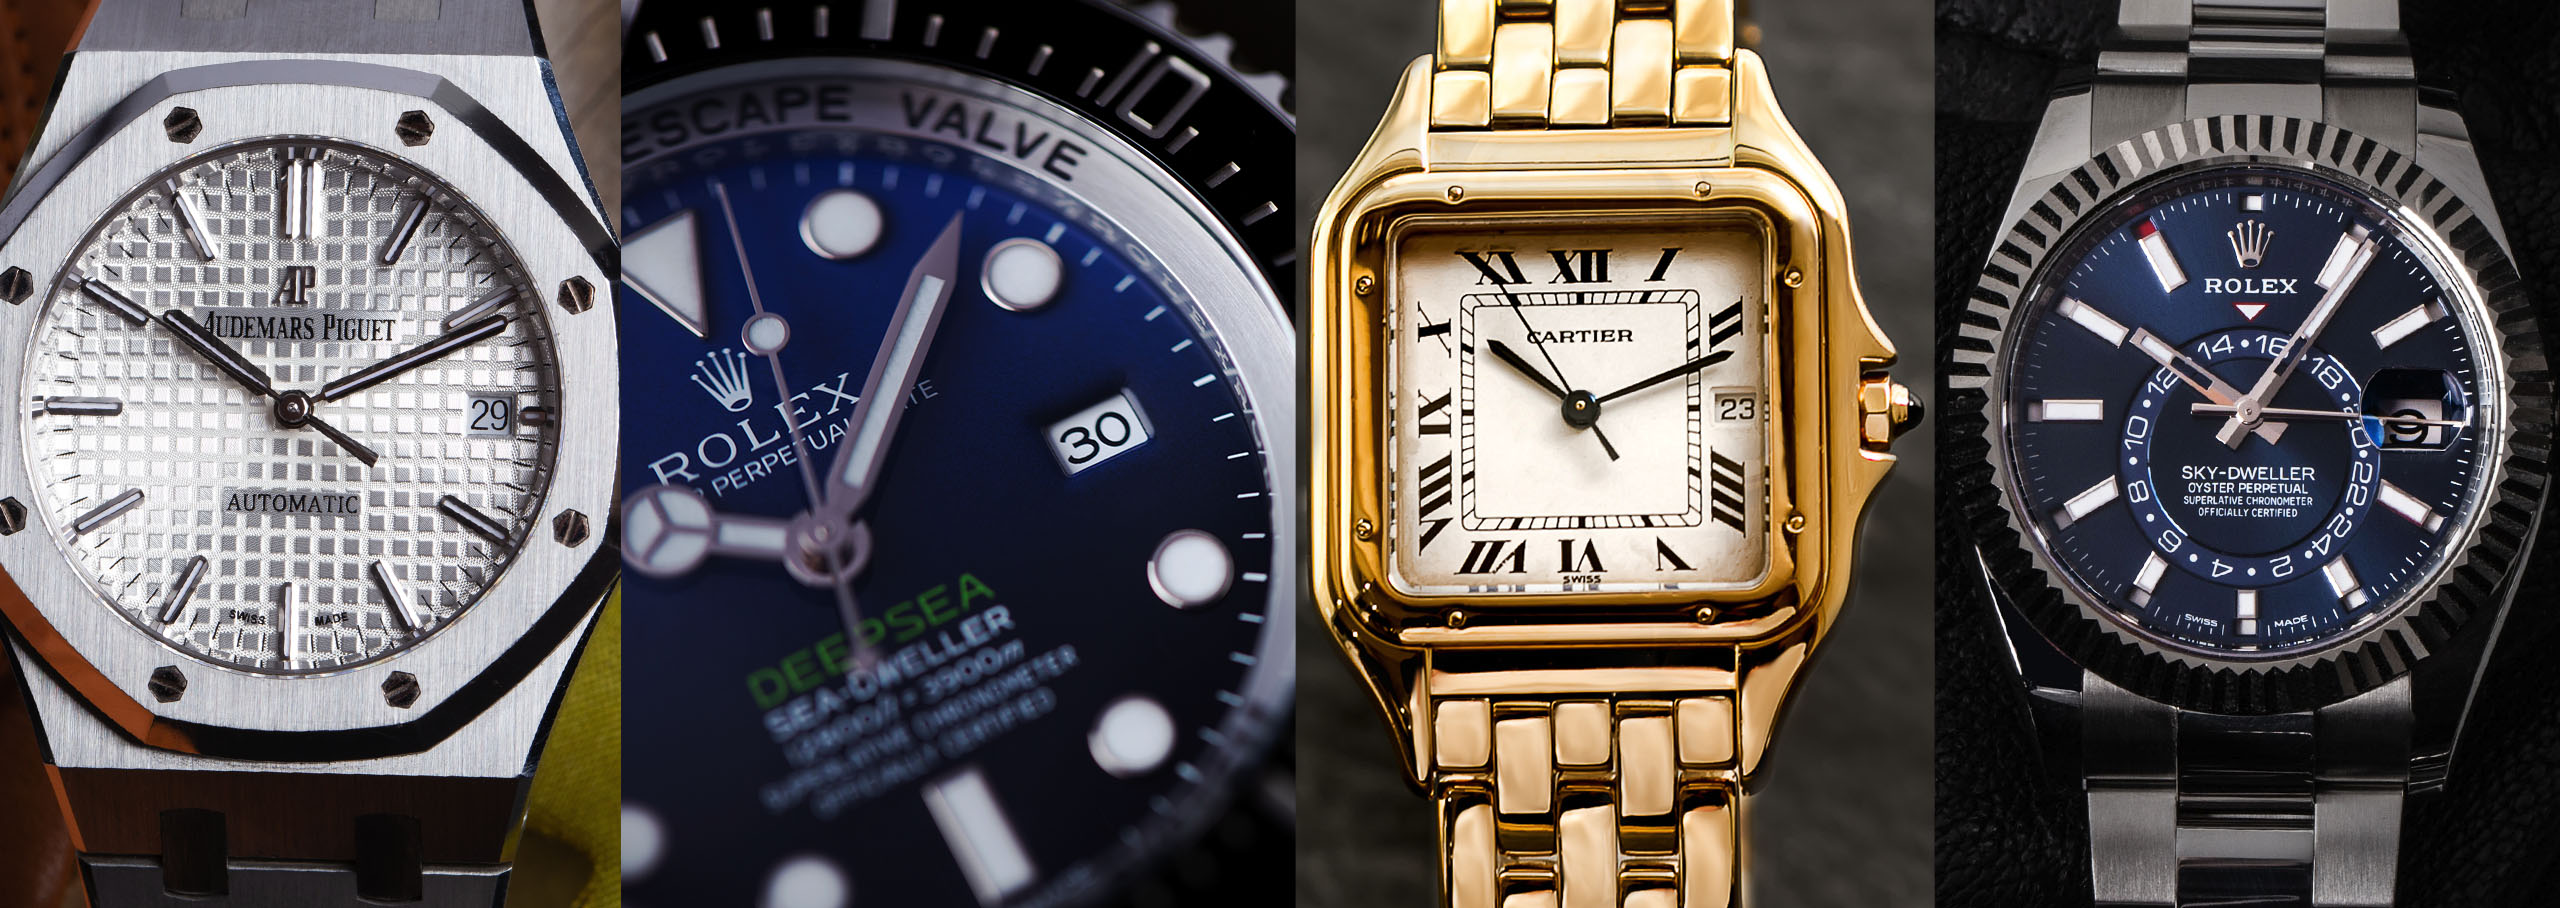 Celebrity Watches, From Paul Newman's Rolex To Naomi Osaka's TAG Heuer